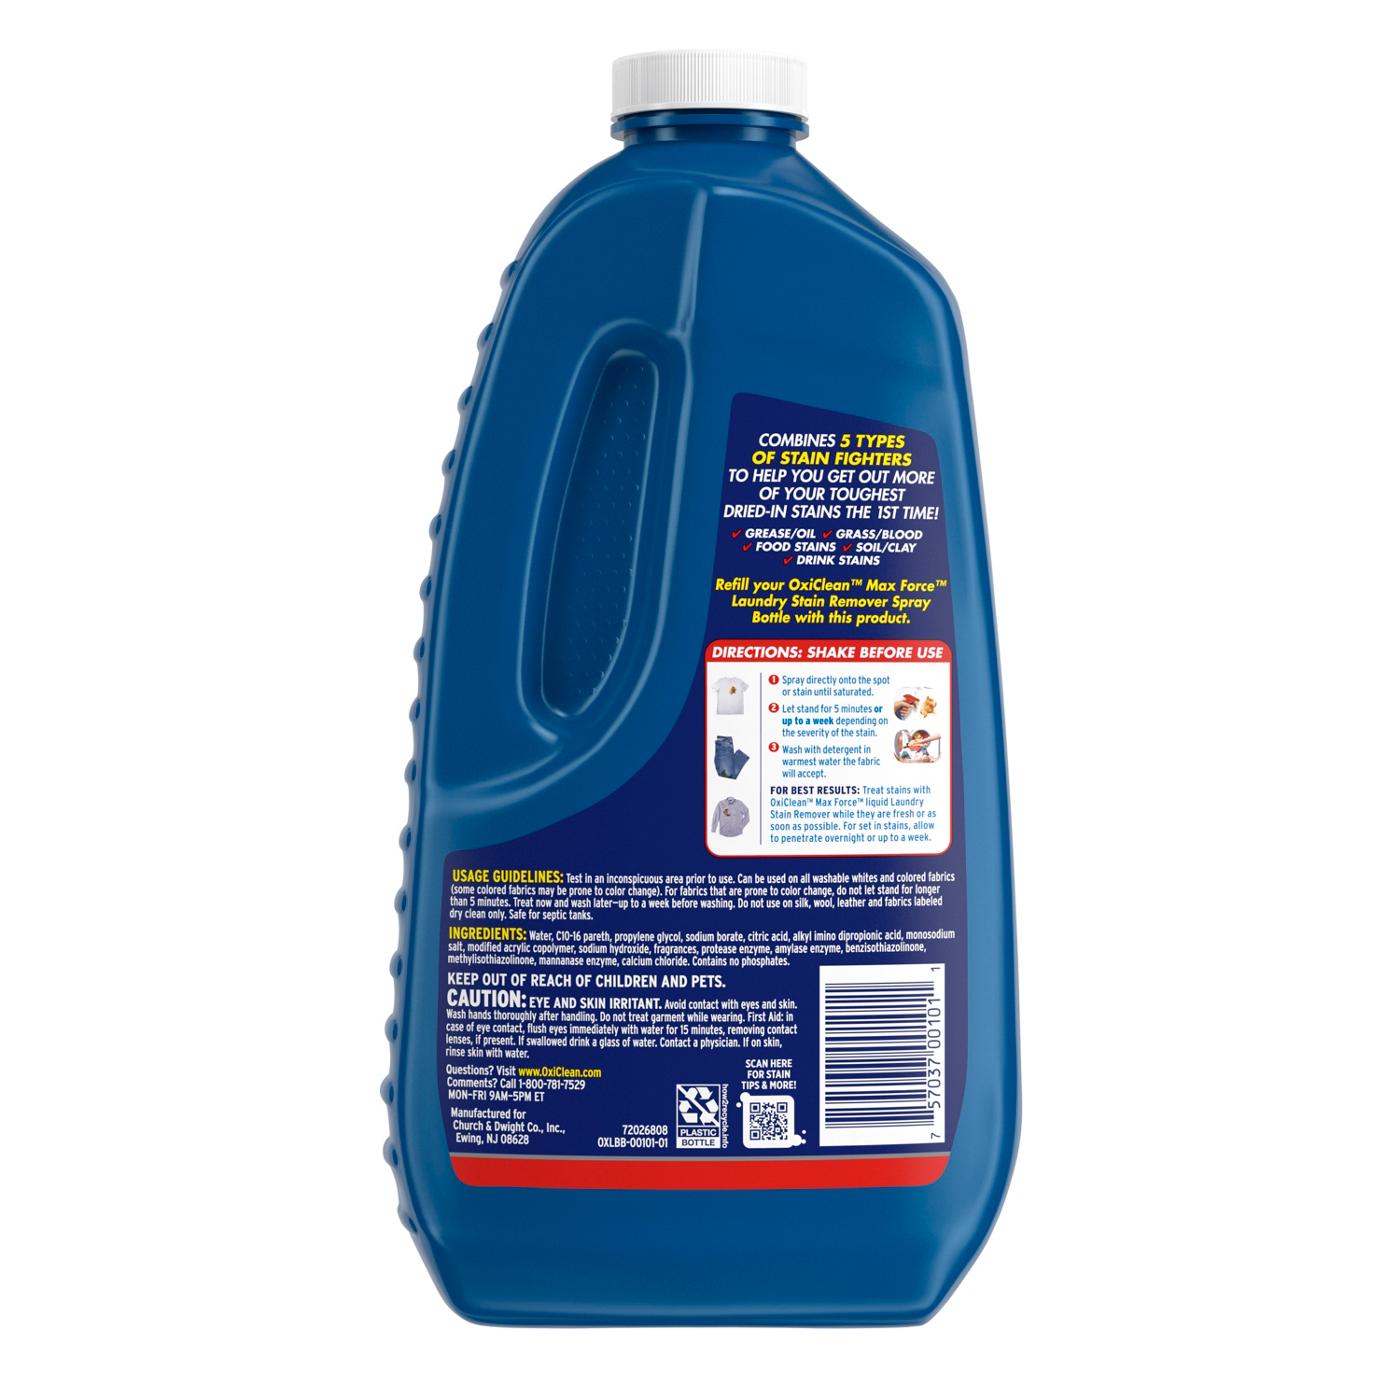 OxiClean Max Force Laundry Stain Remover Refill; image 4 of 4